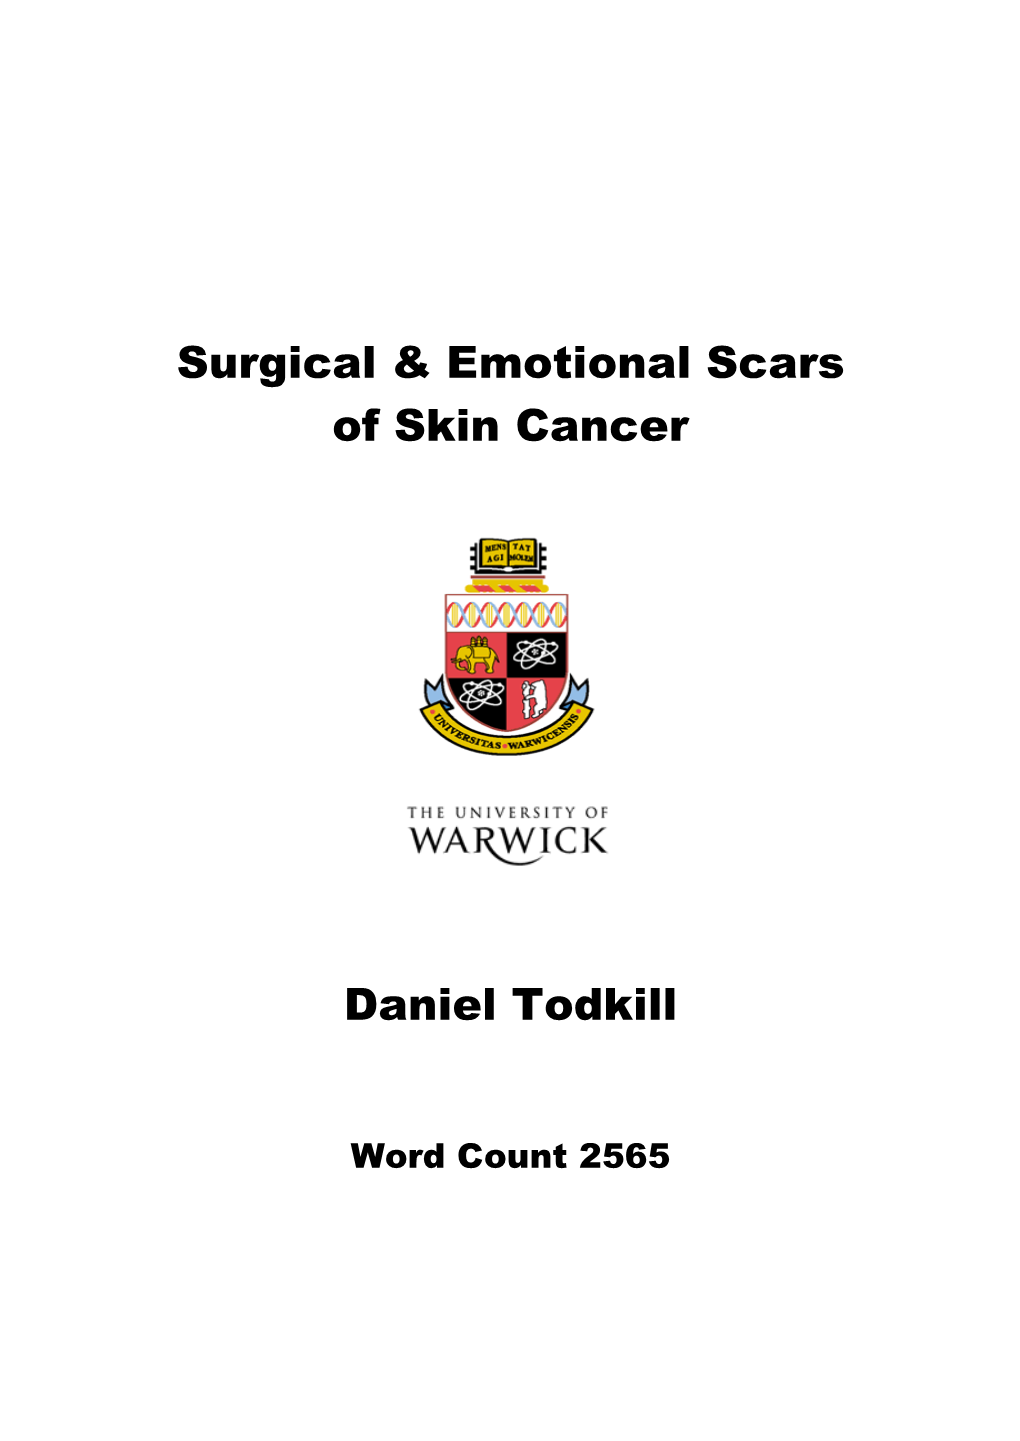 Surgical & Emotional Scars of Skin Cancer Daniel Todkill